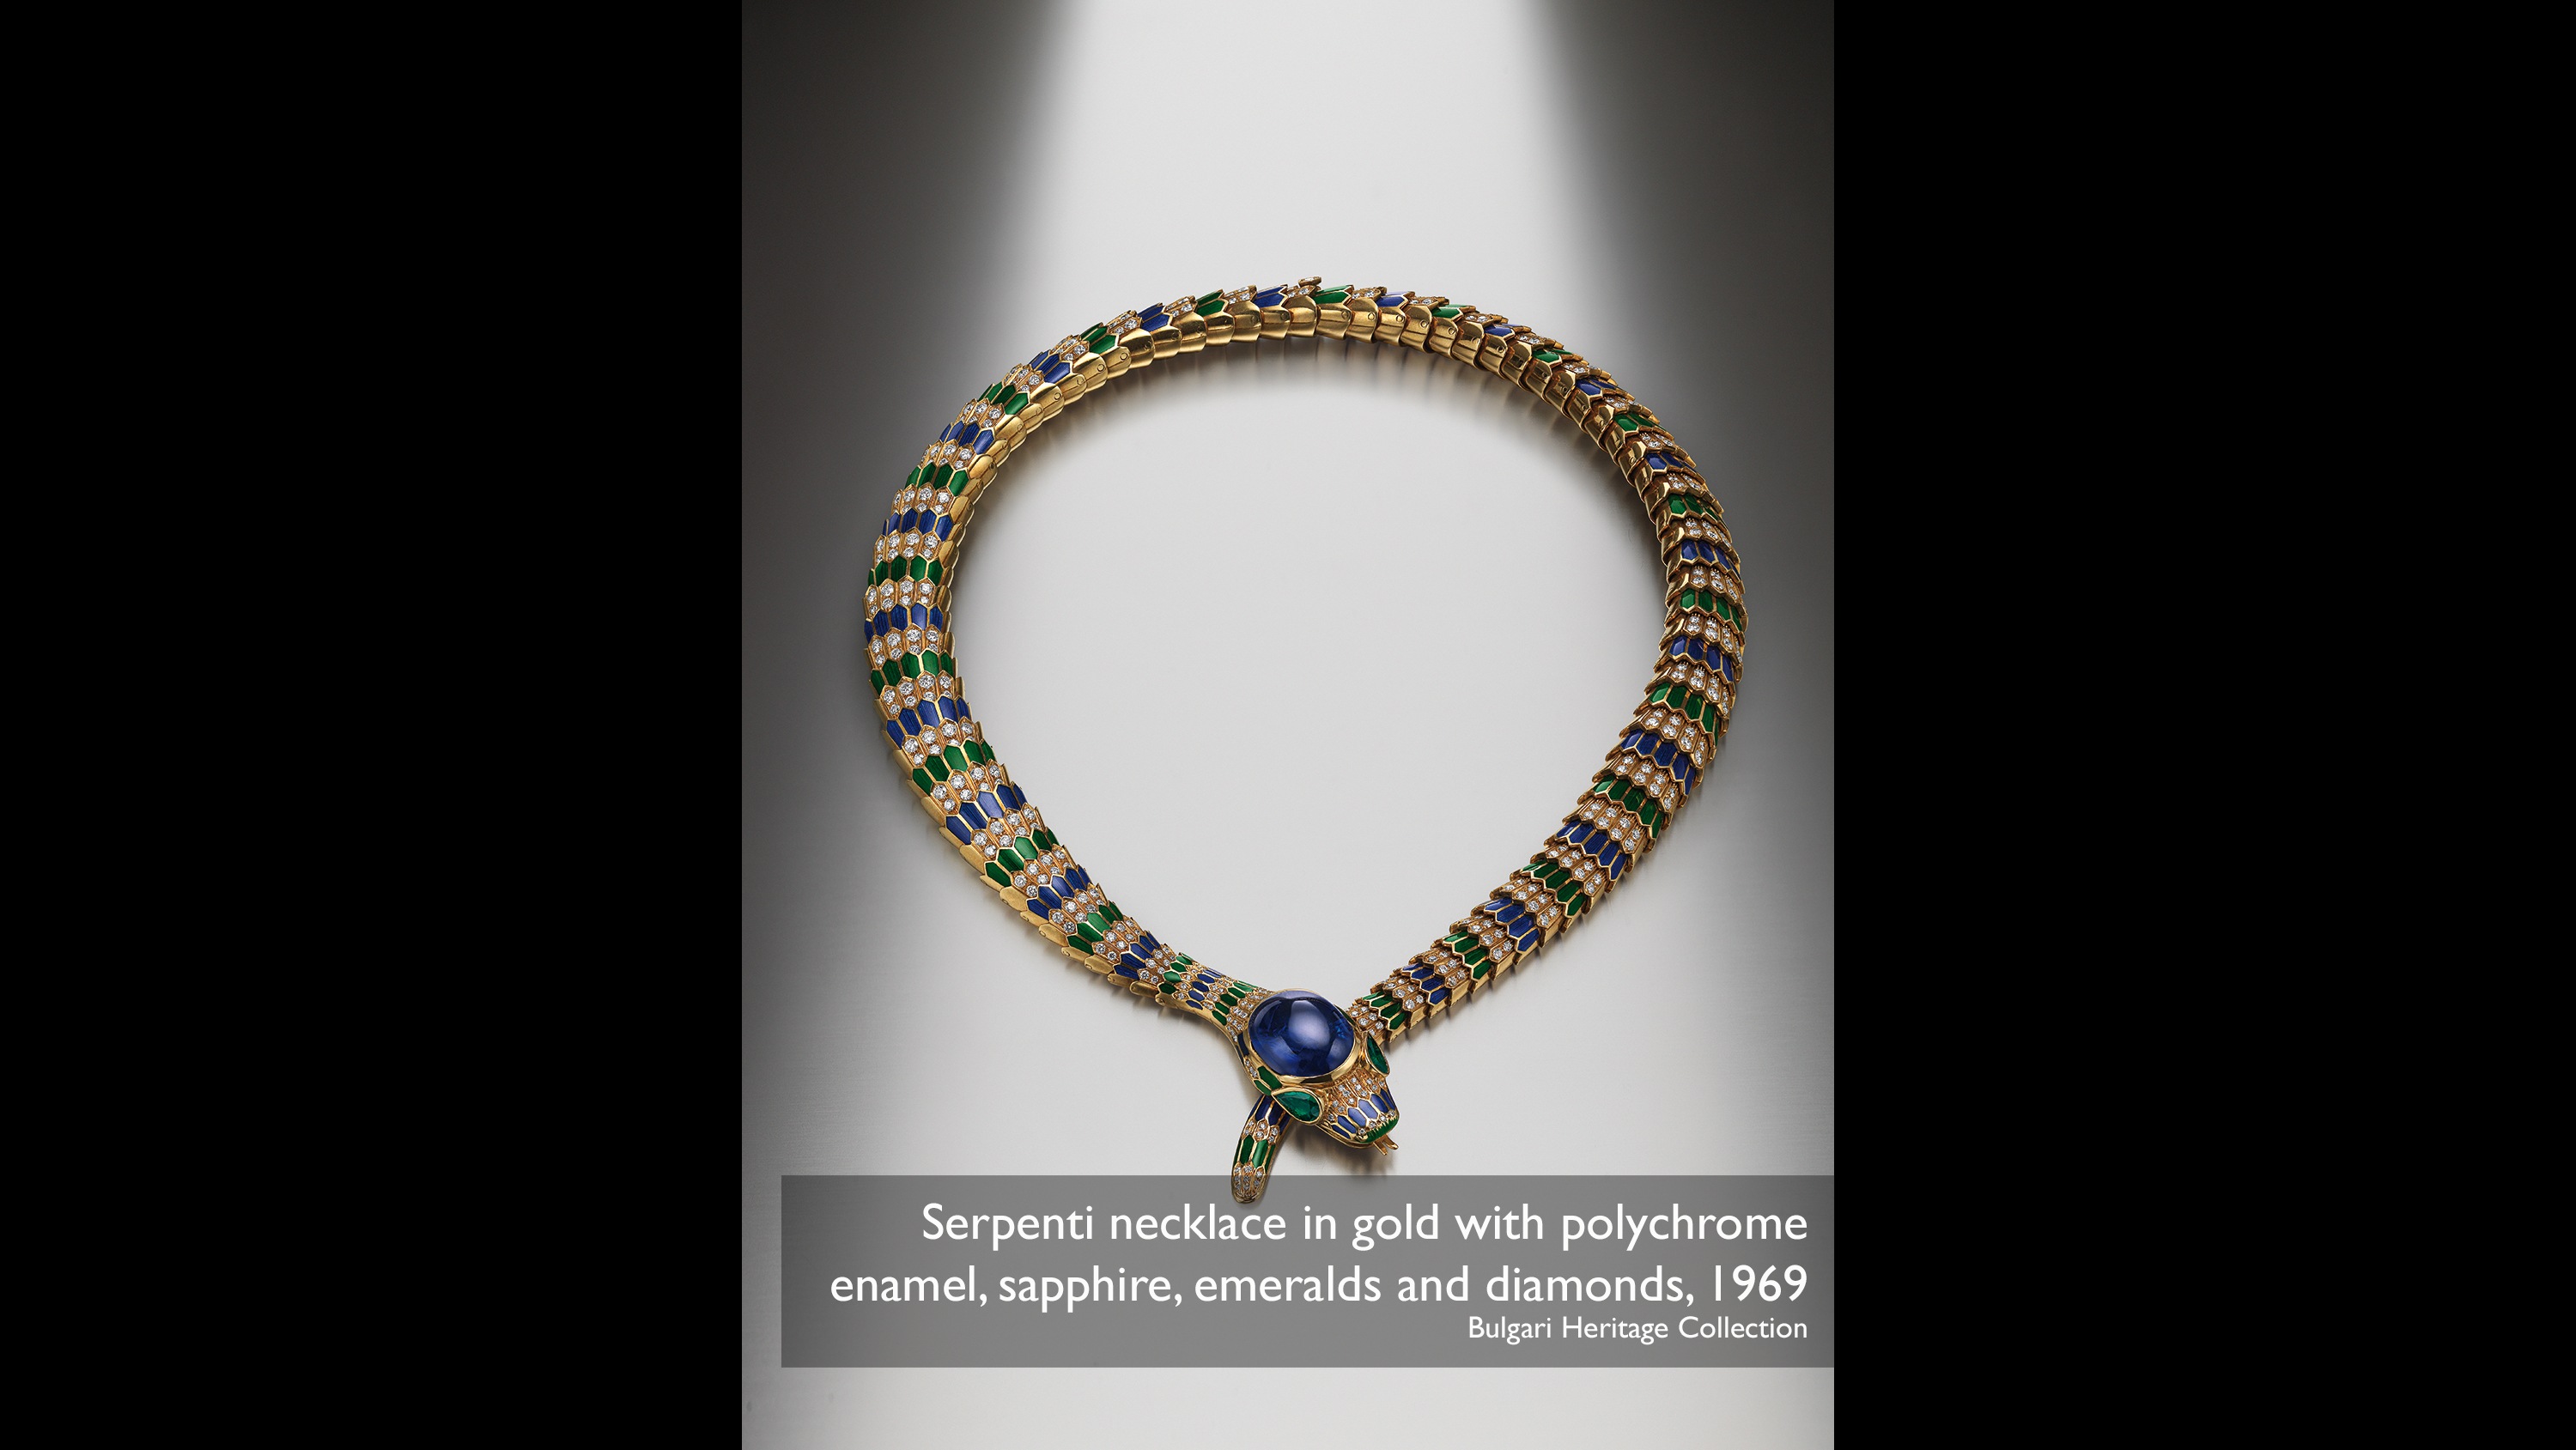 Serpenti necklace in gold with polychrome enamel, sapphire, emeralds and diamonds, 1969 Bulgari Heritage Collection